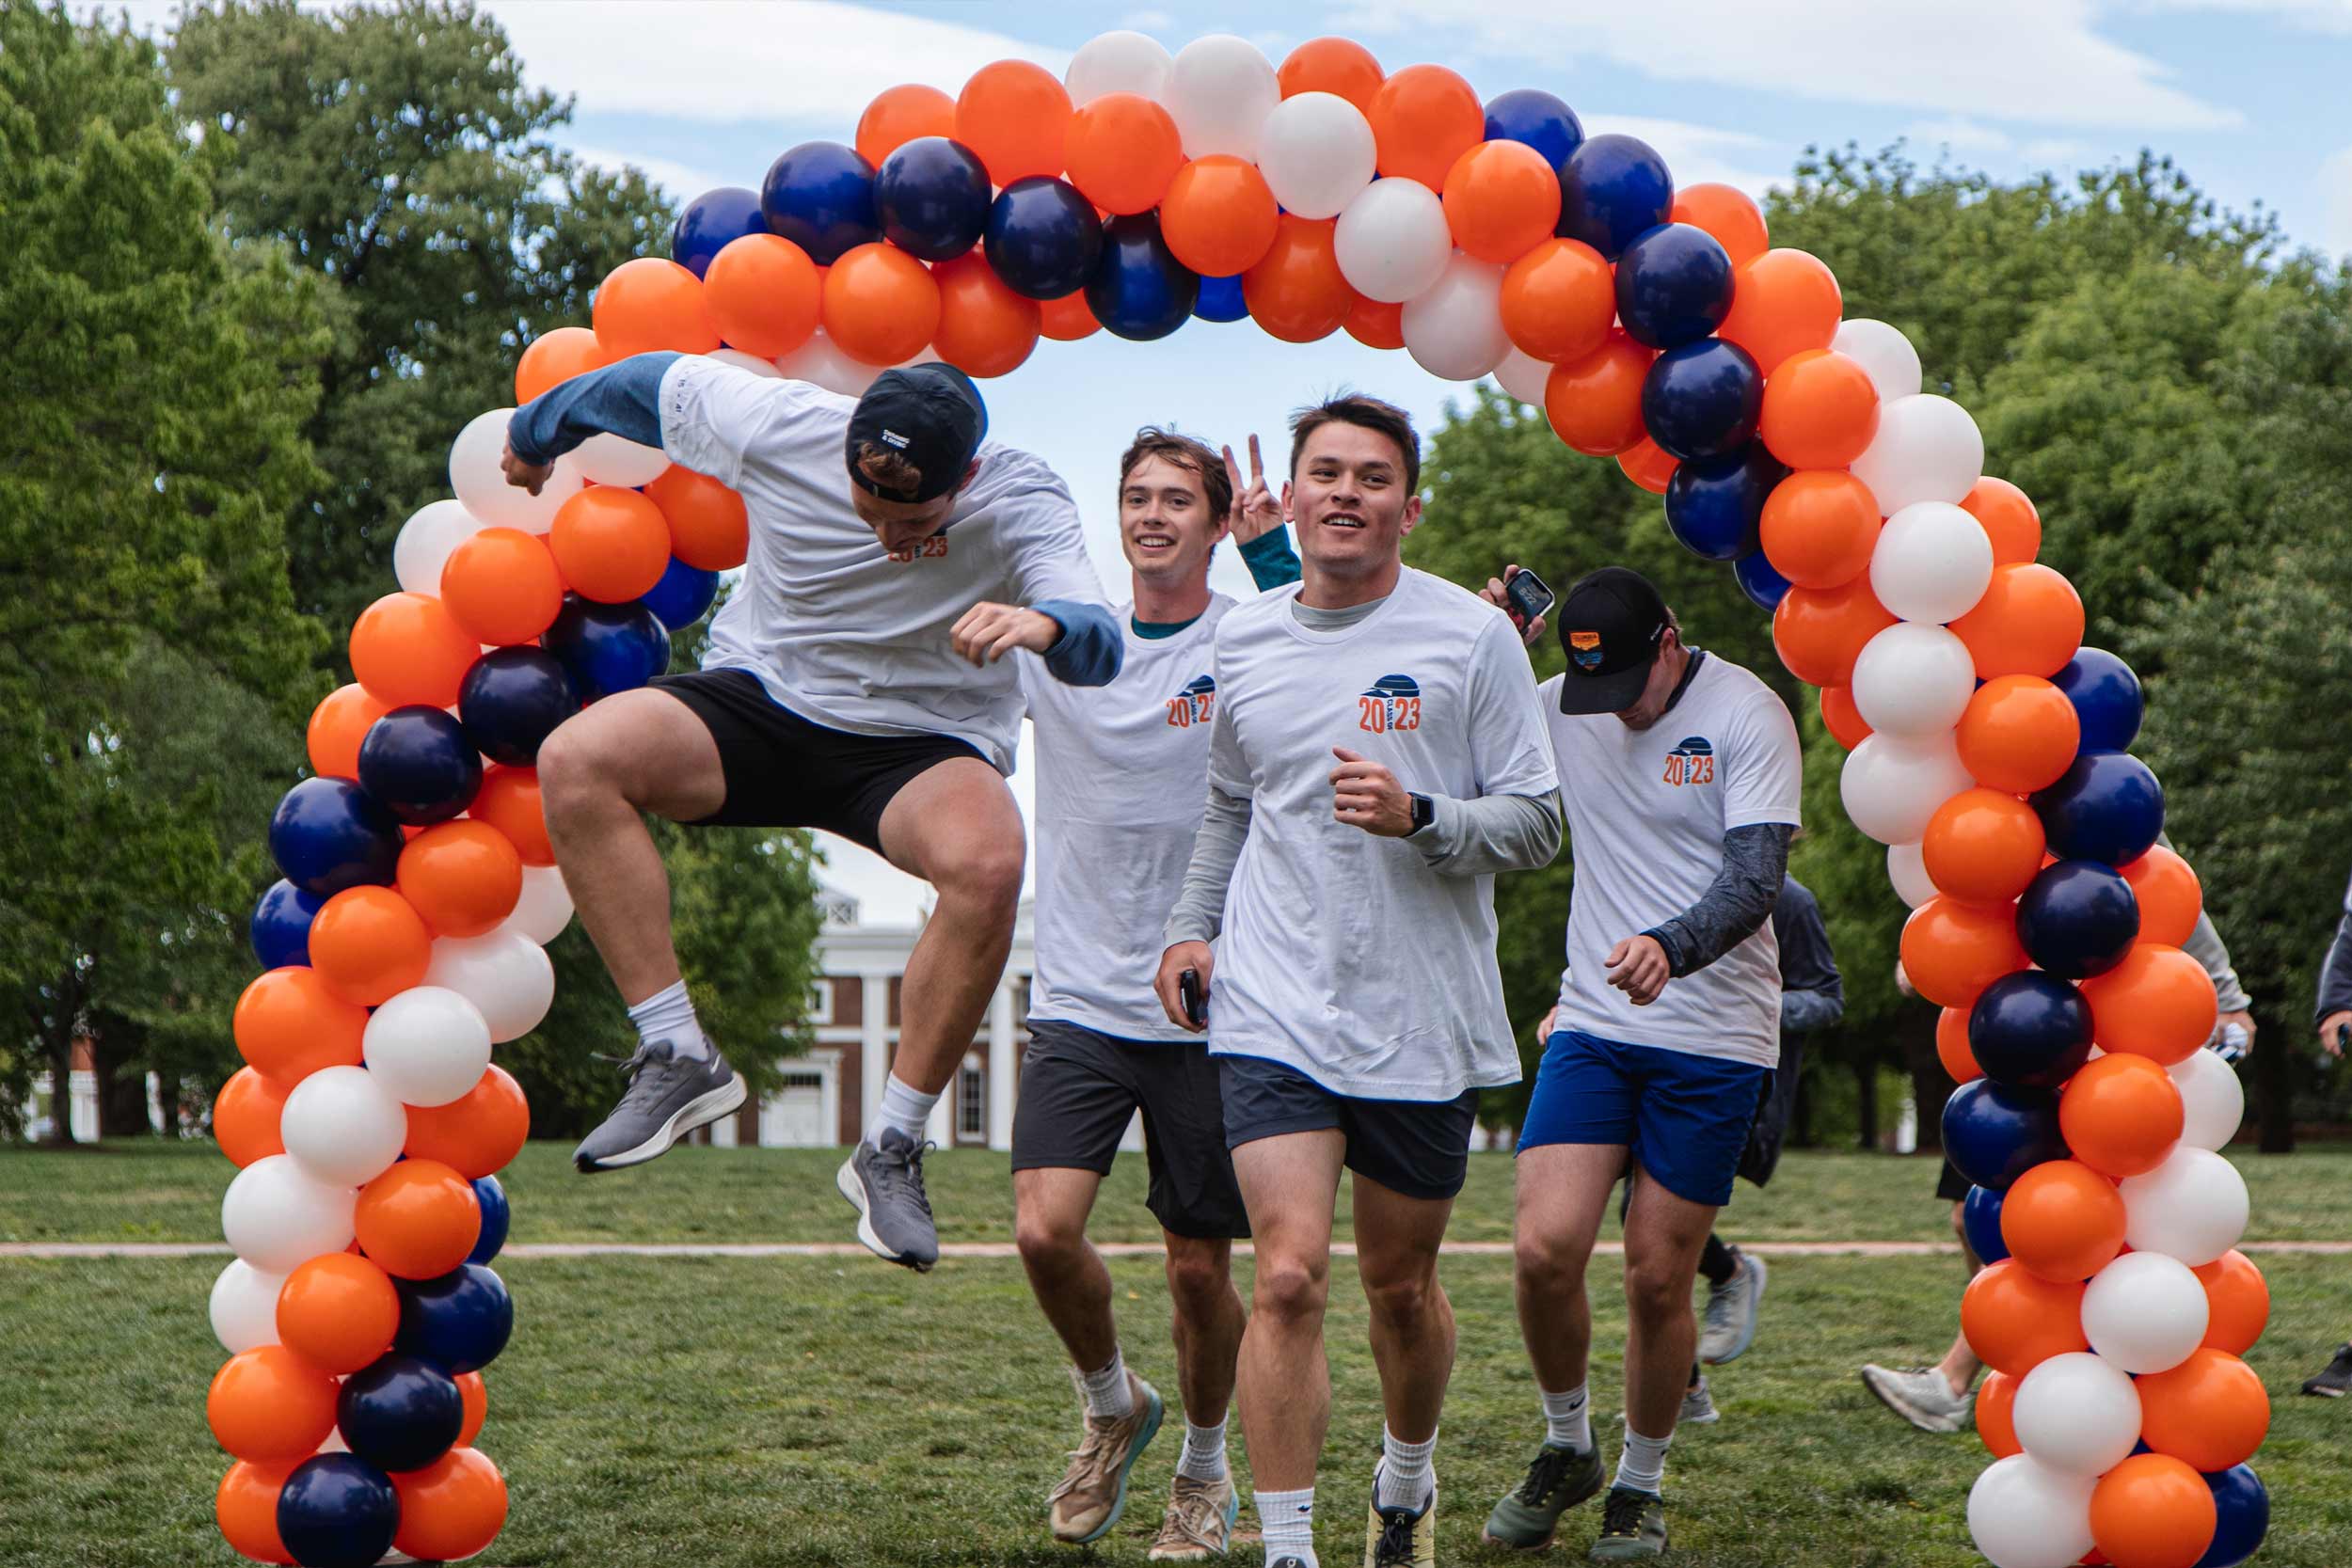 Fourth-year students on their final “Run With Jim” pass through balloon finish line